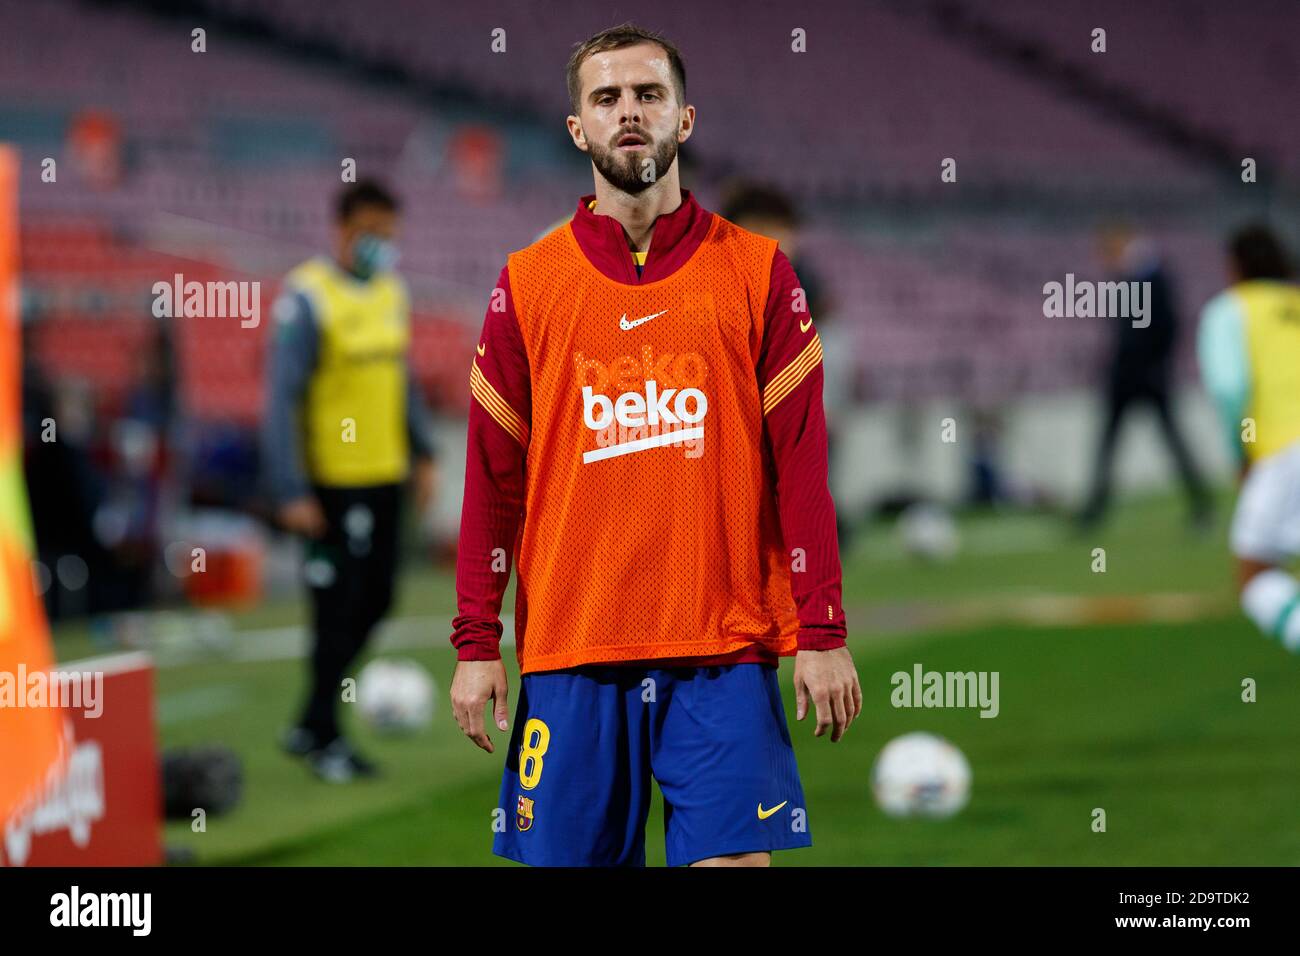 Barcelona, Spain. 07th Nov, 2020. Miralem Pjanic of FC Barcelona during the Liga Santander match between FC Barcelona and Real Betis Balompie at Camp Nou in Barcelona, Spain. Credit: Dax Images/Alamy Live News Stock Photo